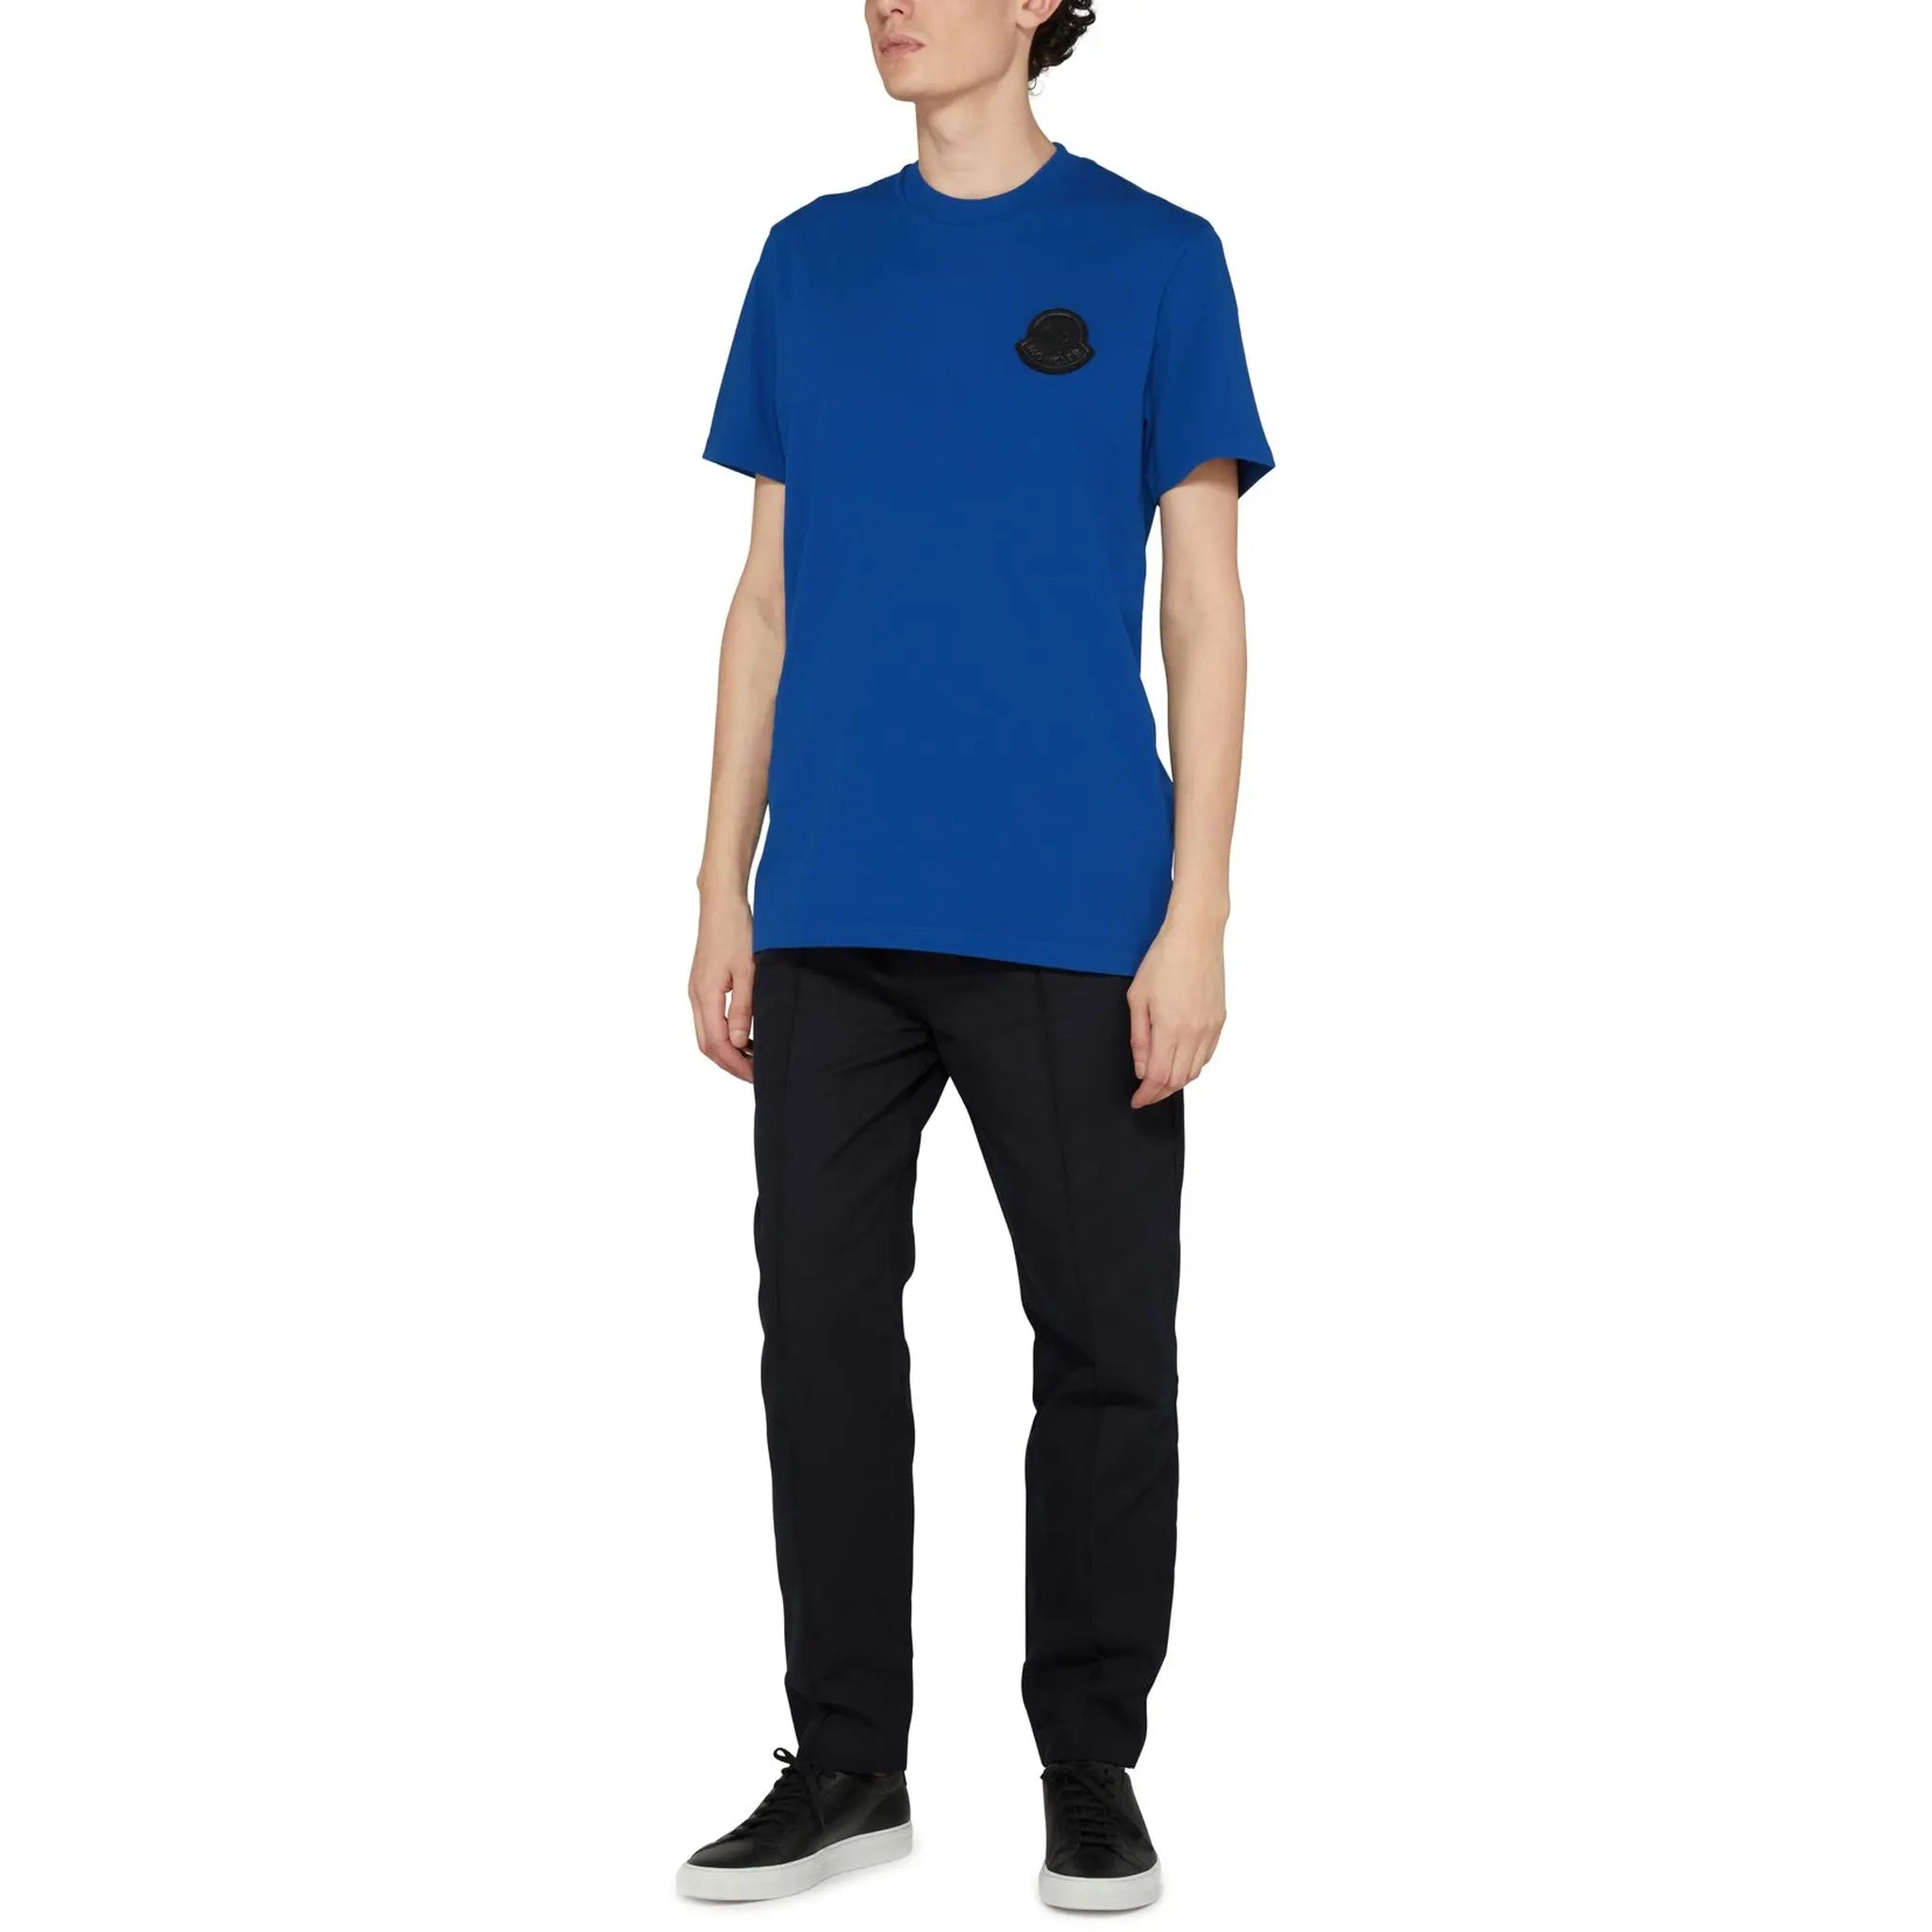 Model view of Moncler SN44 Patched Logo Short Sleeve Blue T Shirt MC17TMH6BLUS2AAA00